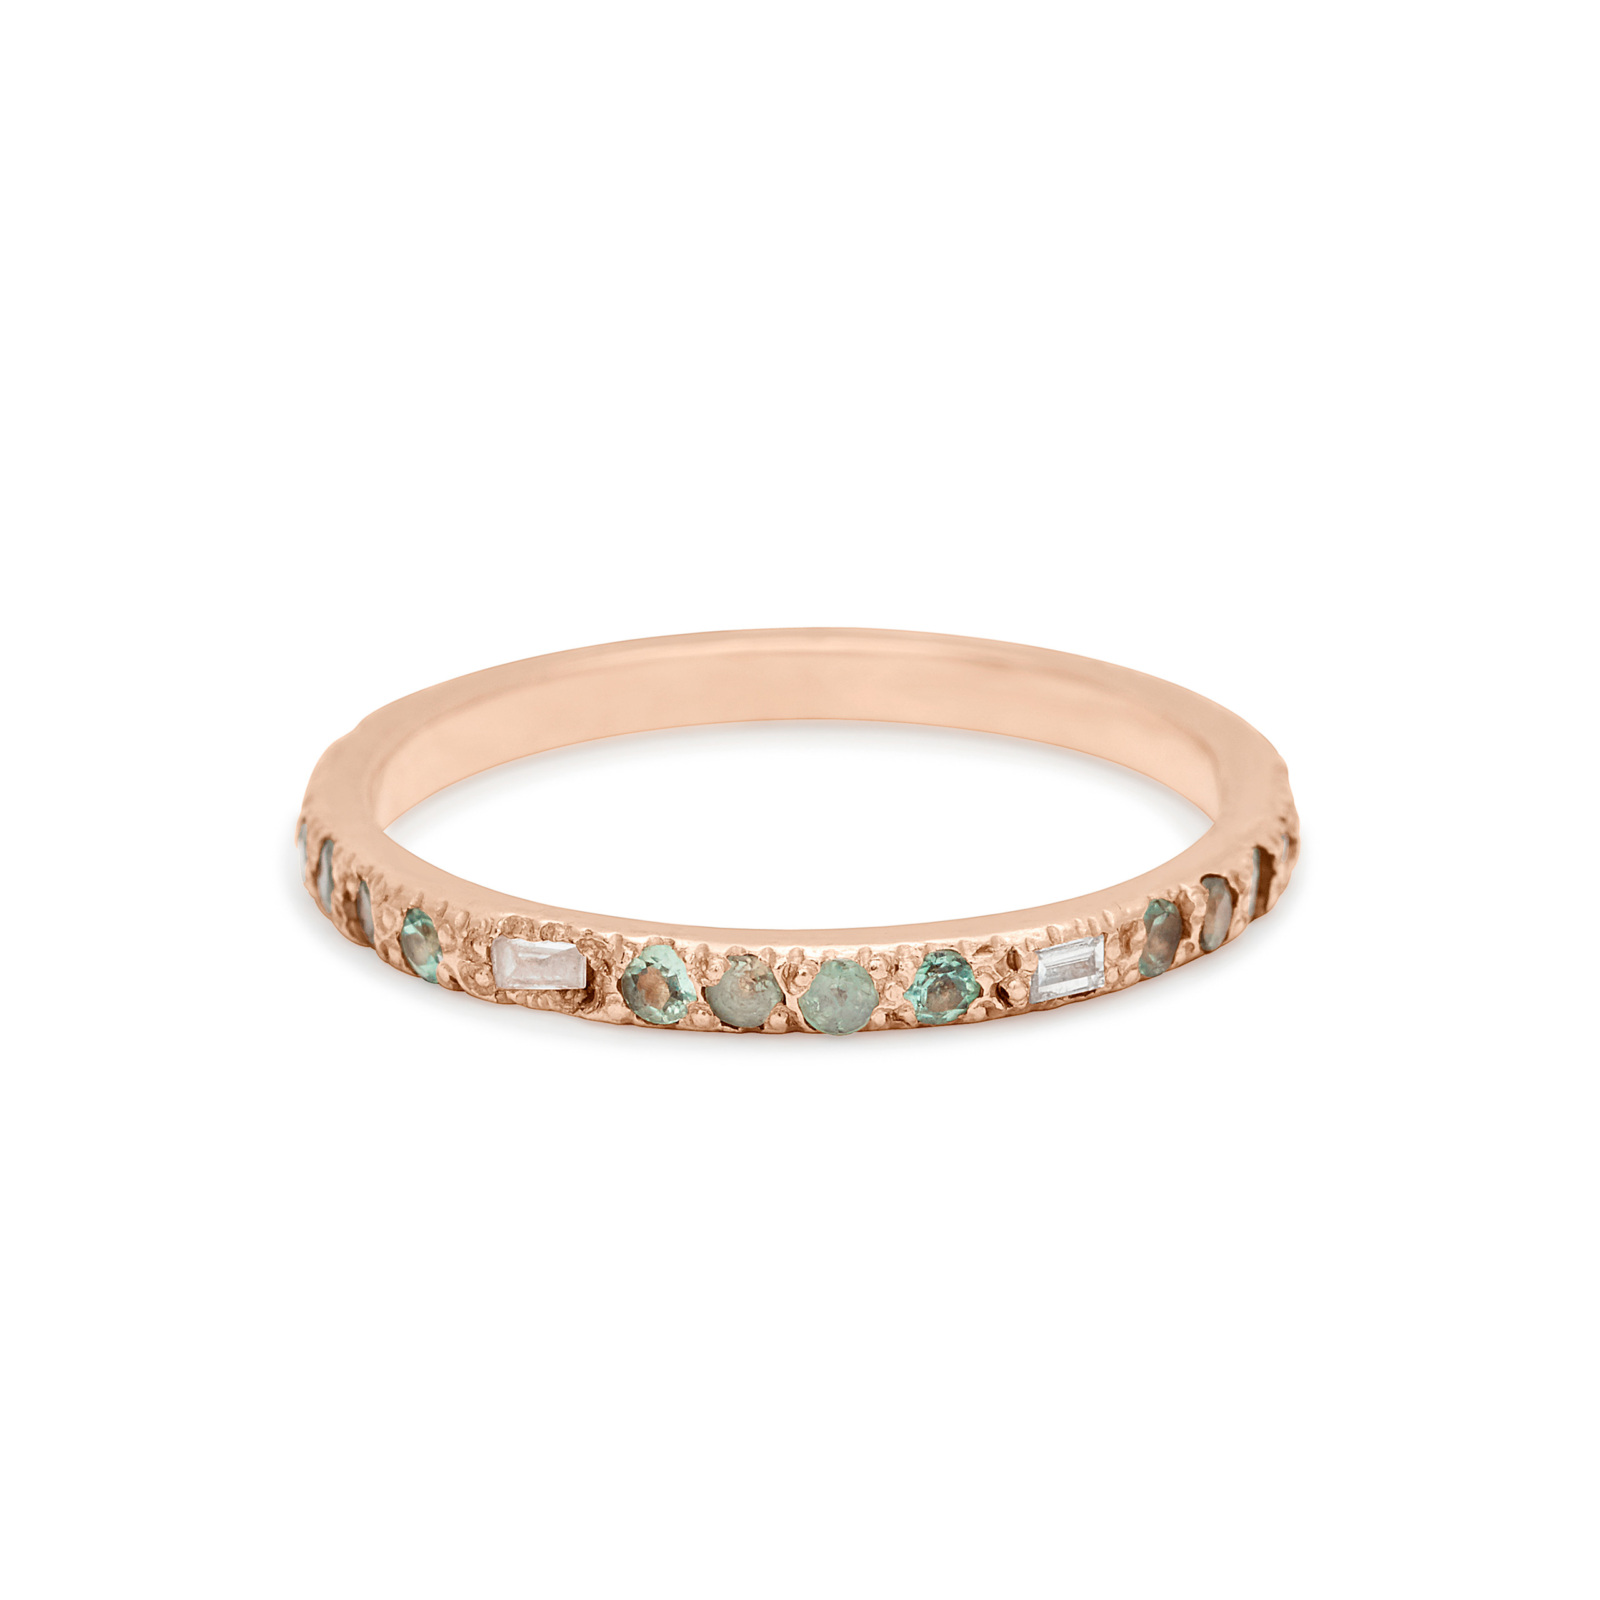 Custom Baguette Band in 18k pink gold with diamonds and gemstones personalized